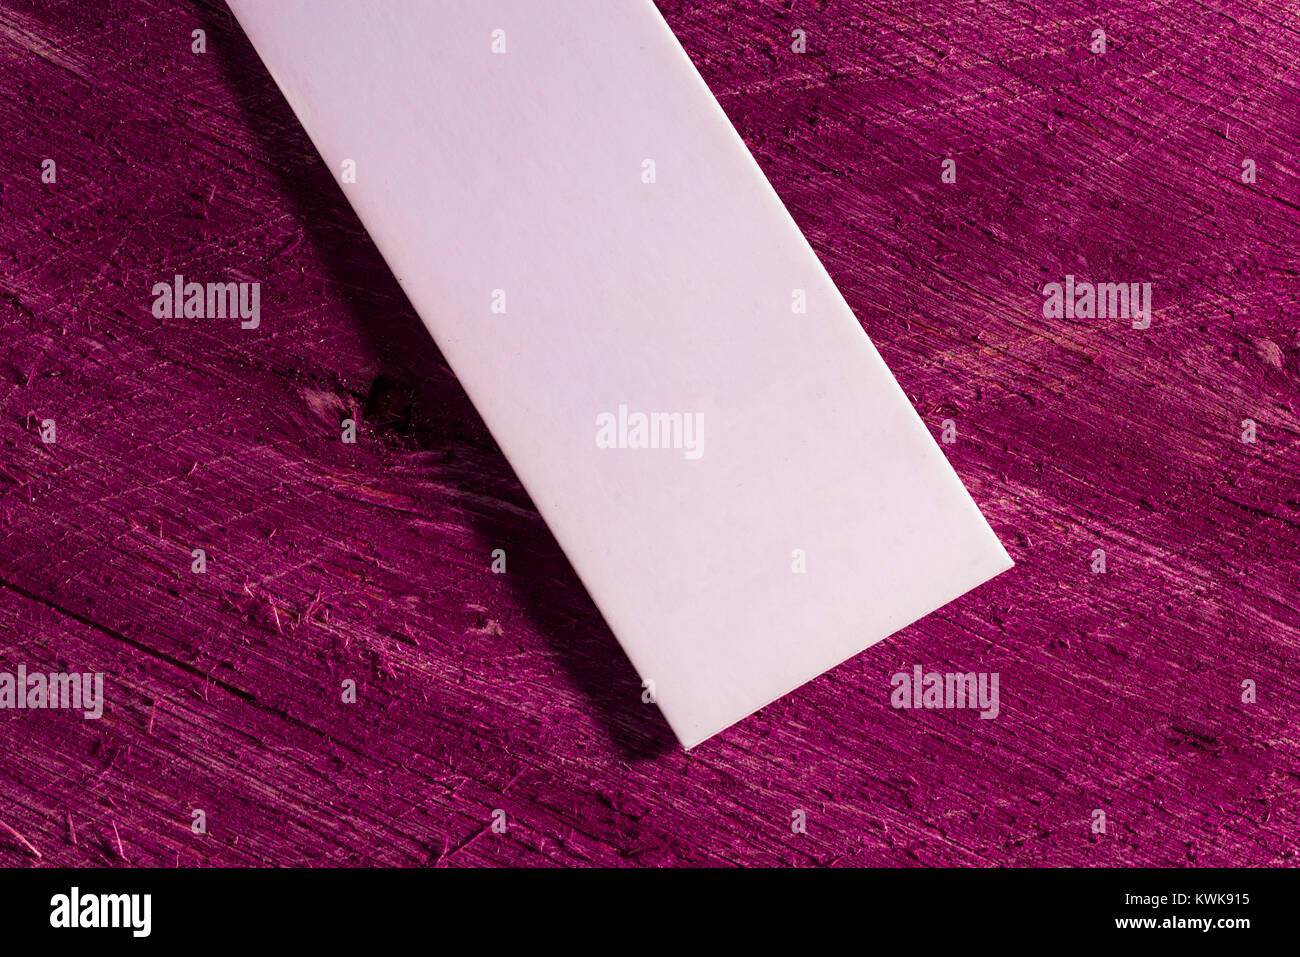 textile label, white cardboard business card Stock Photo